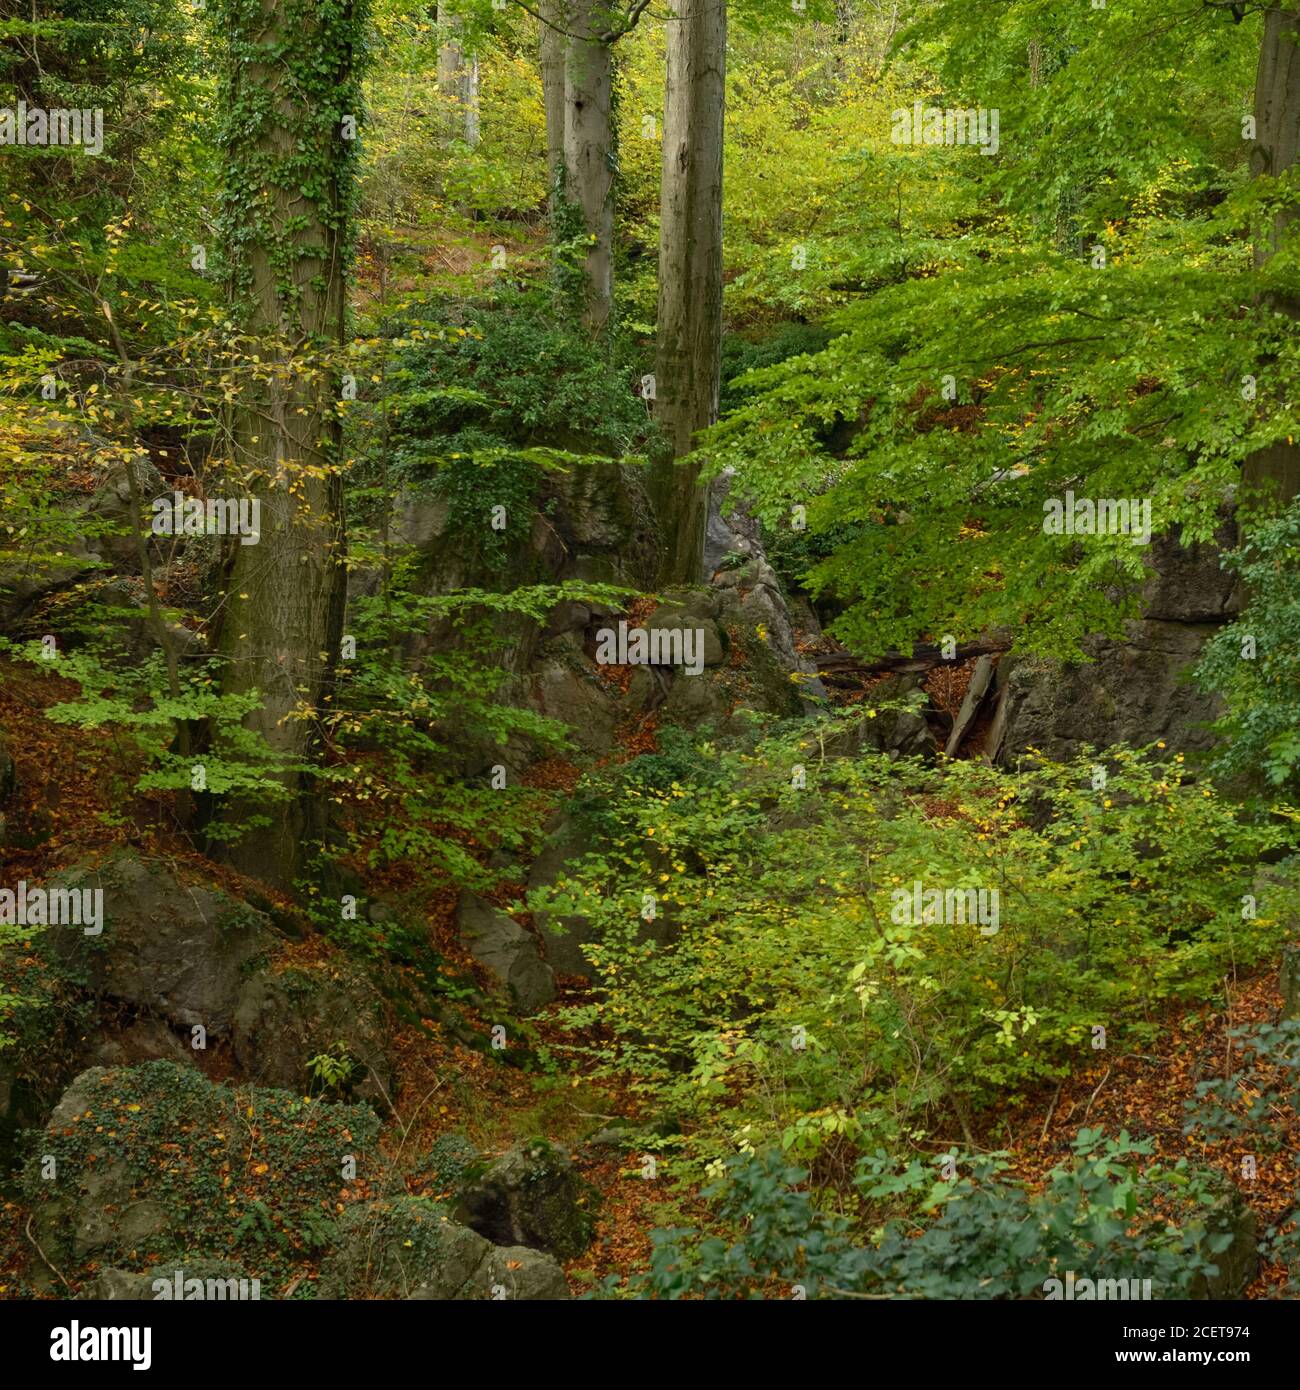 Felsenmeer, famous Nature Reserve, sea of rocks close to Hemer, Sauerland, wildly romantic beech forest in autumn, fall, Germany, Europe. Stock Photo